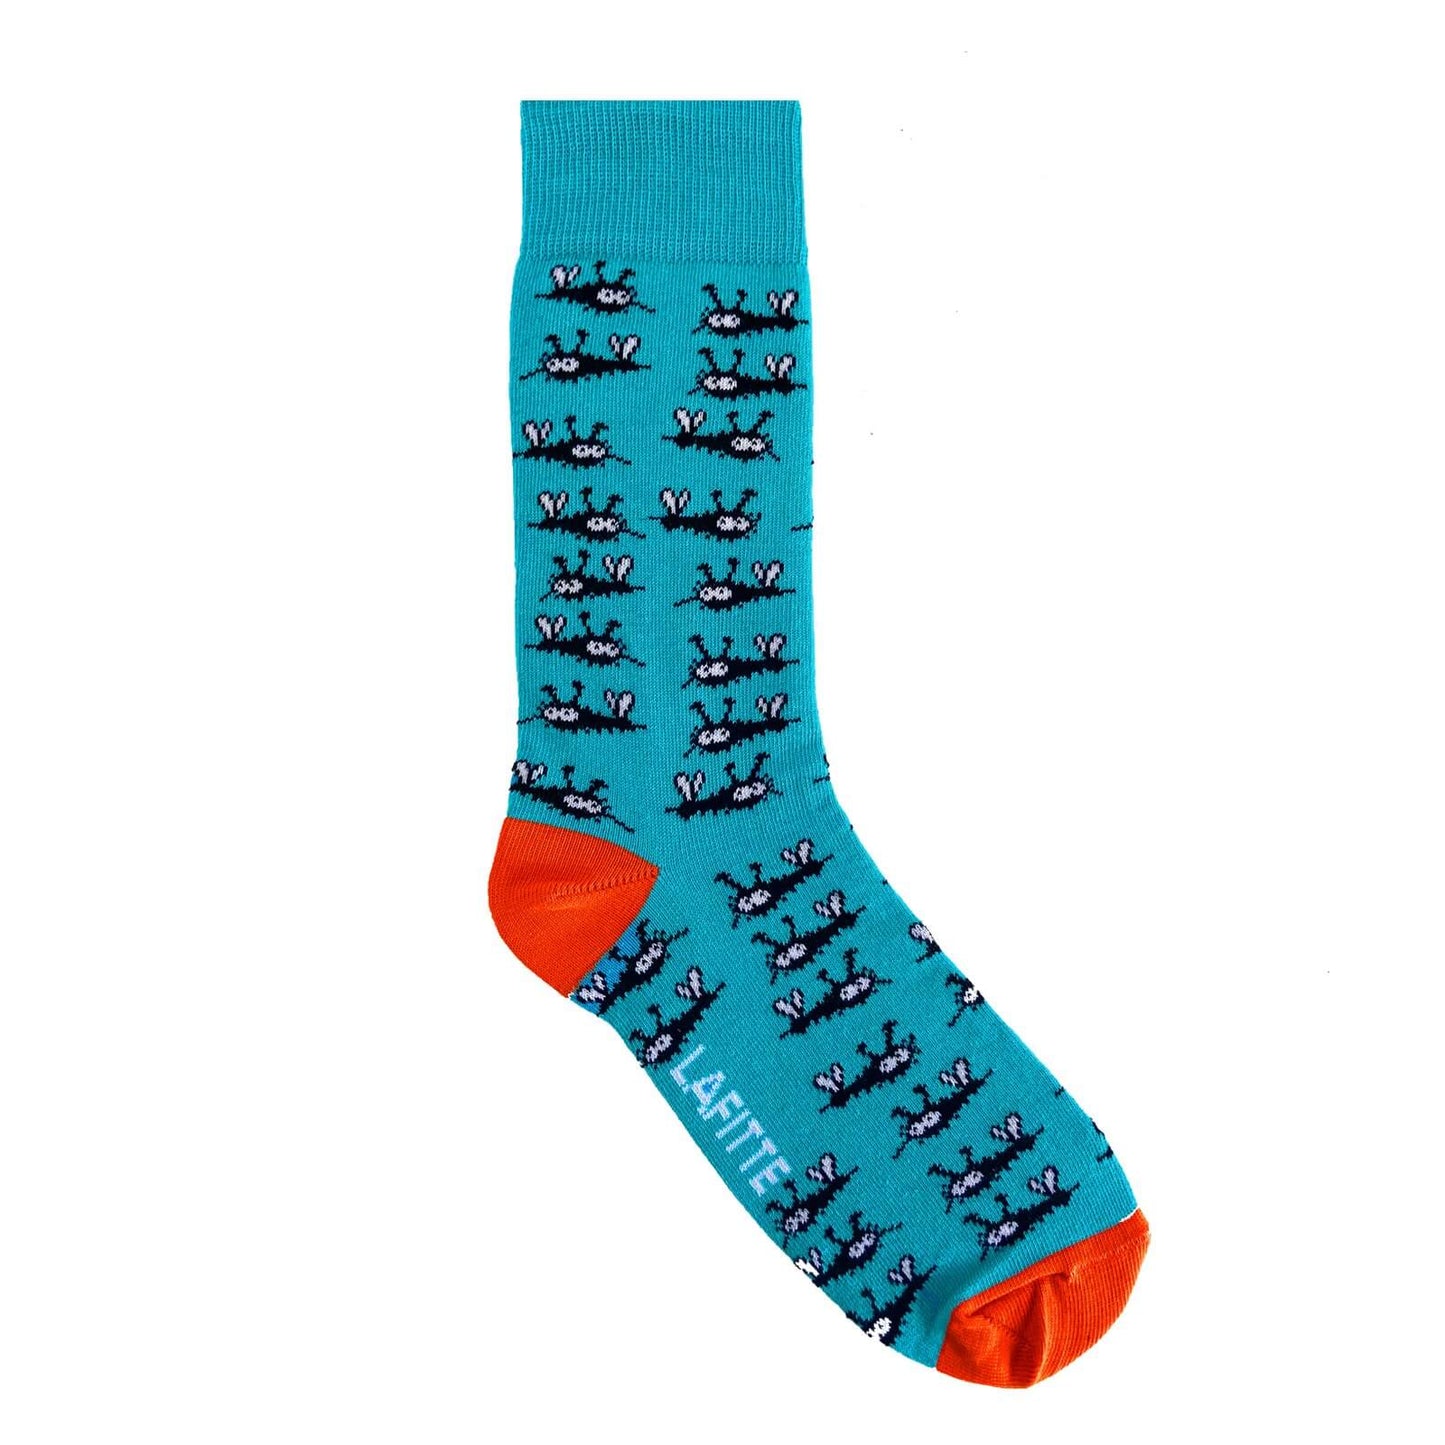 Australian made novelty socks. Colour is Aqua blue with mosquitos all over.